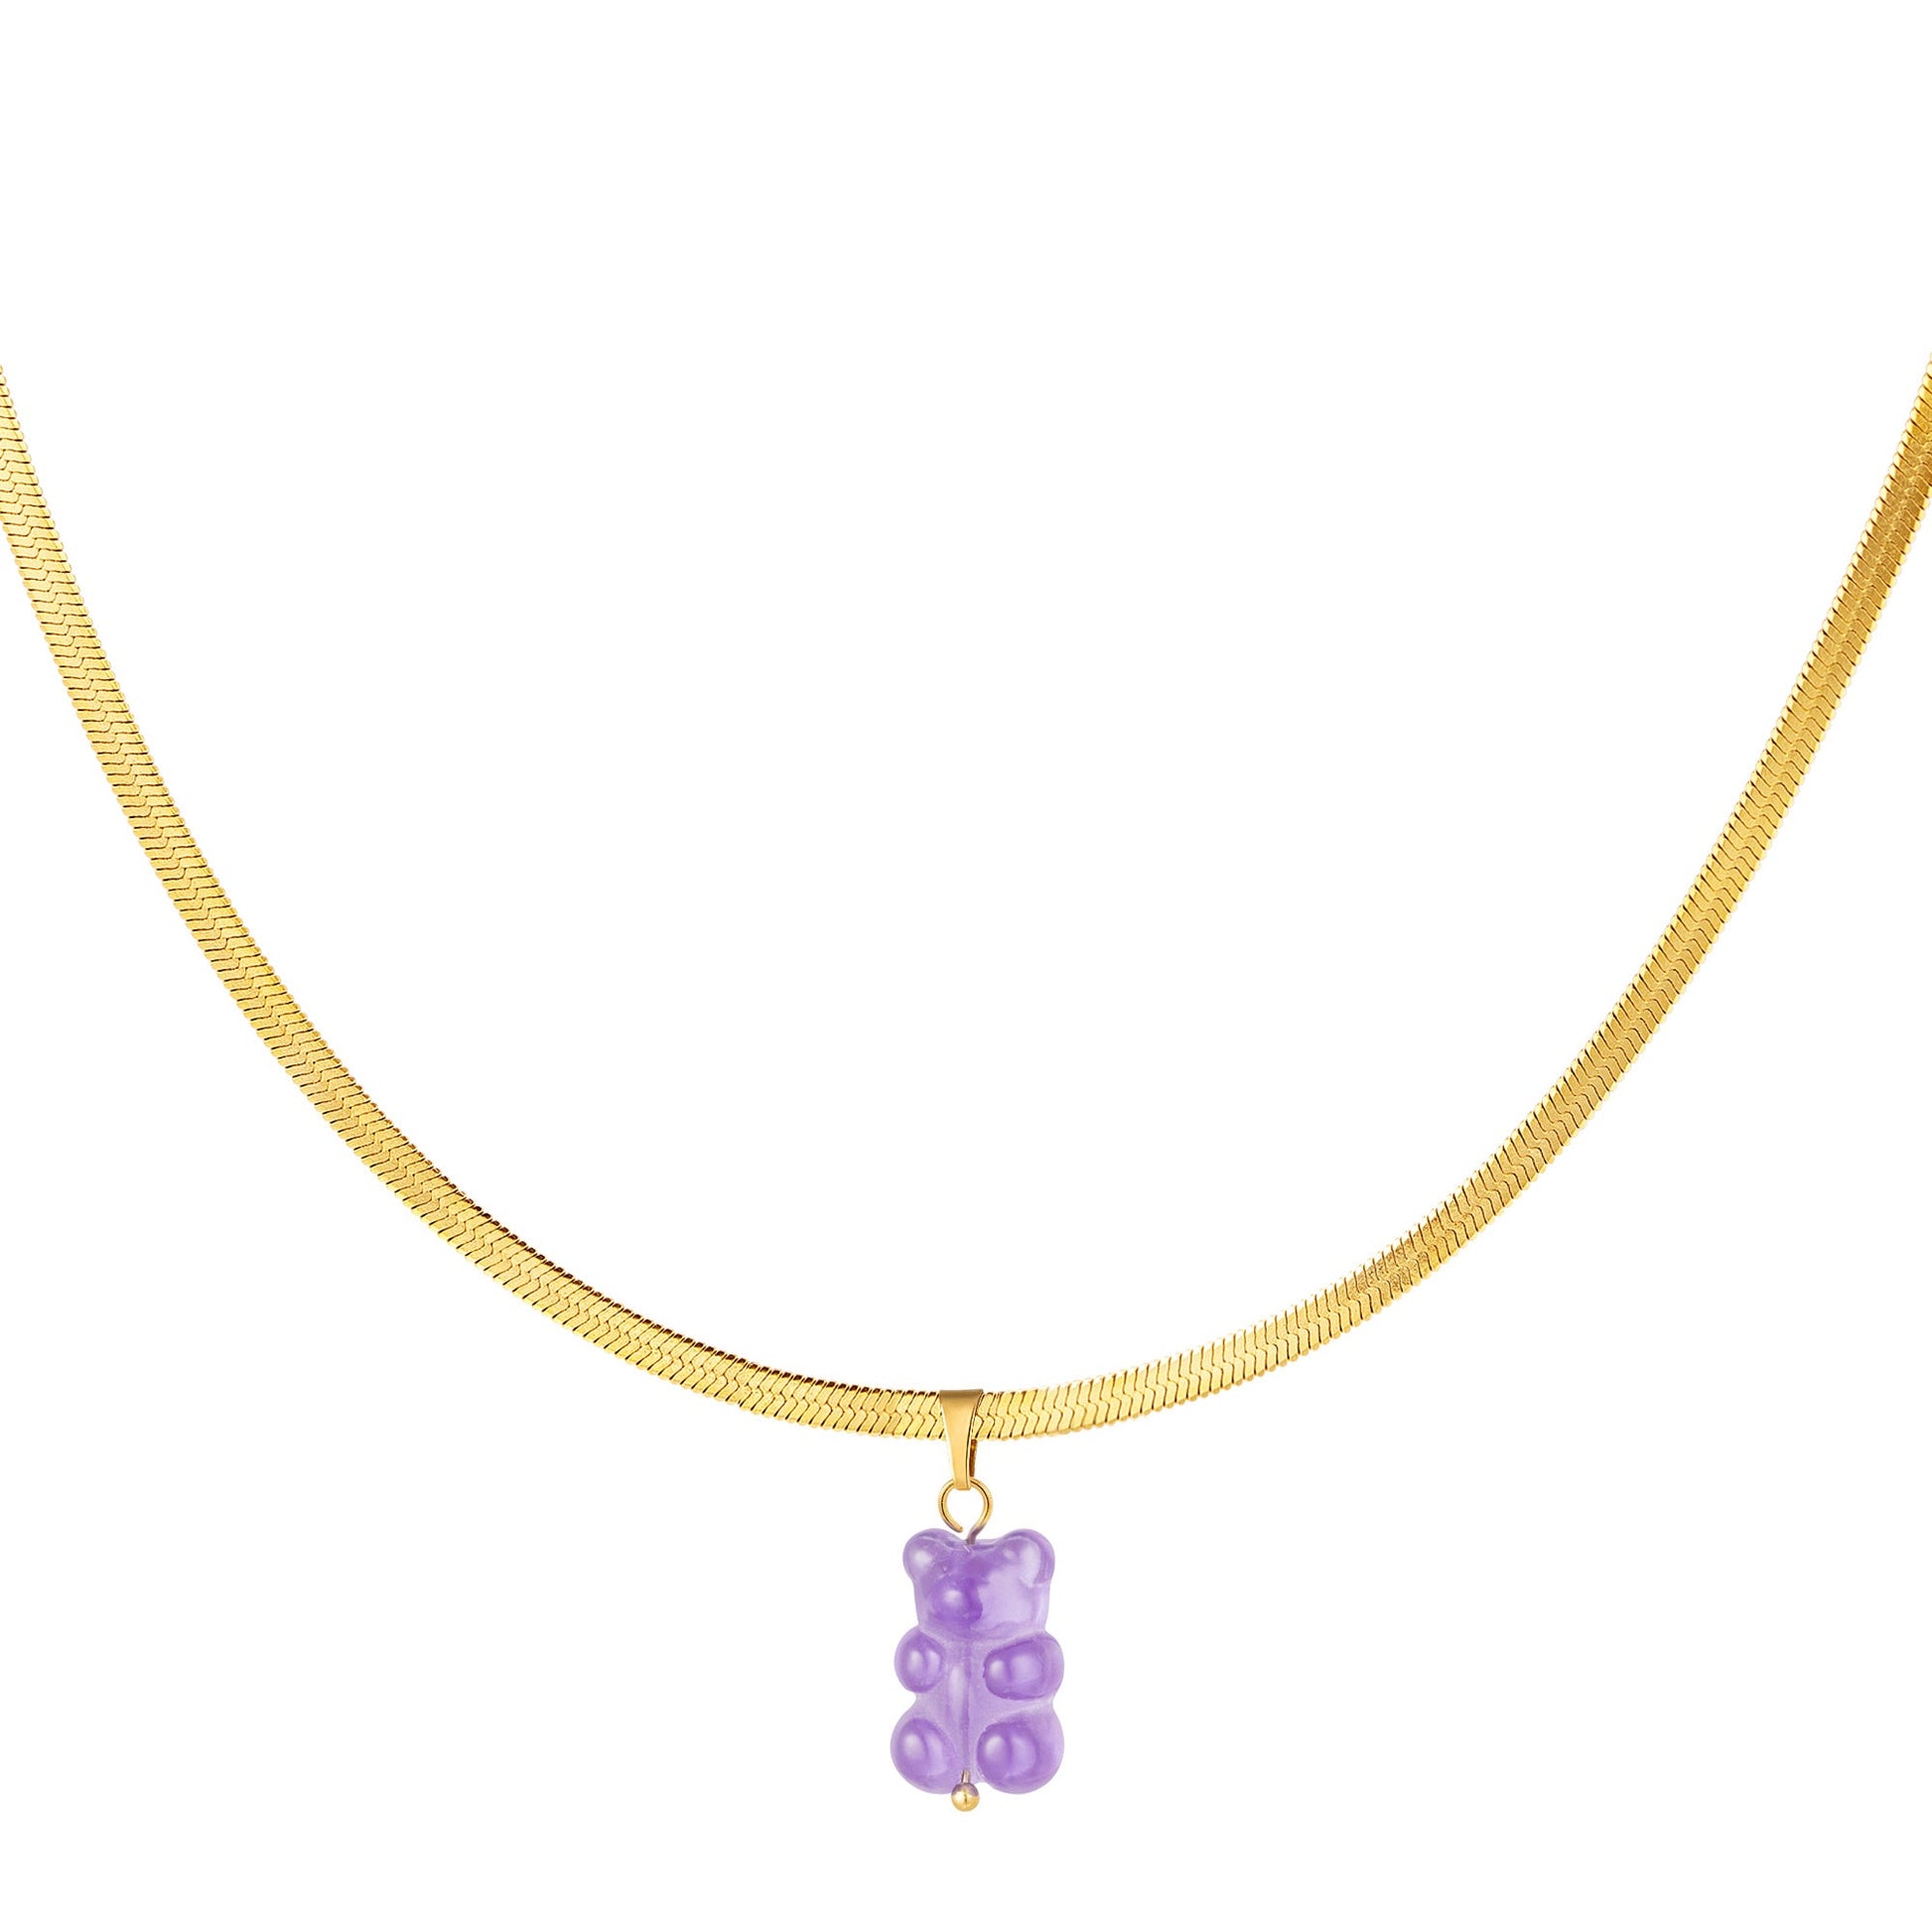 NECKLACE | GUMMY BEAR - PAARS & GOUD